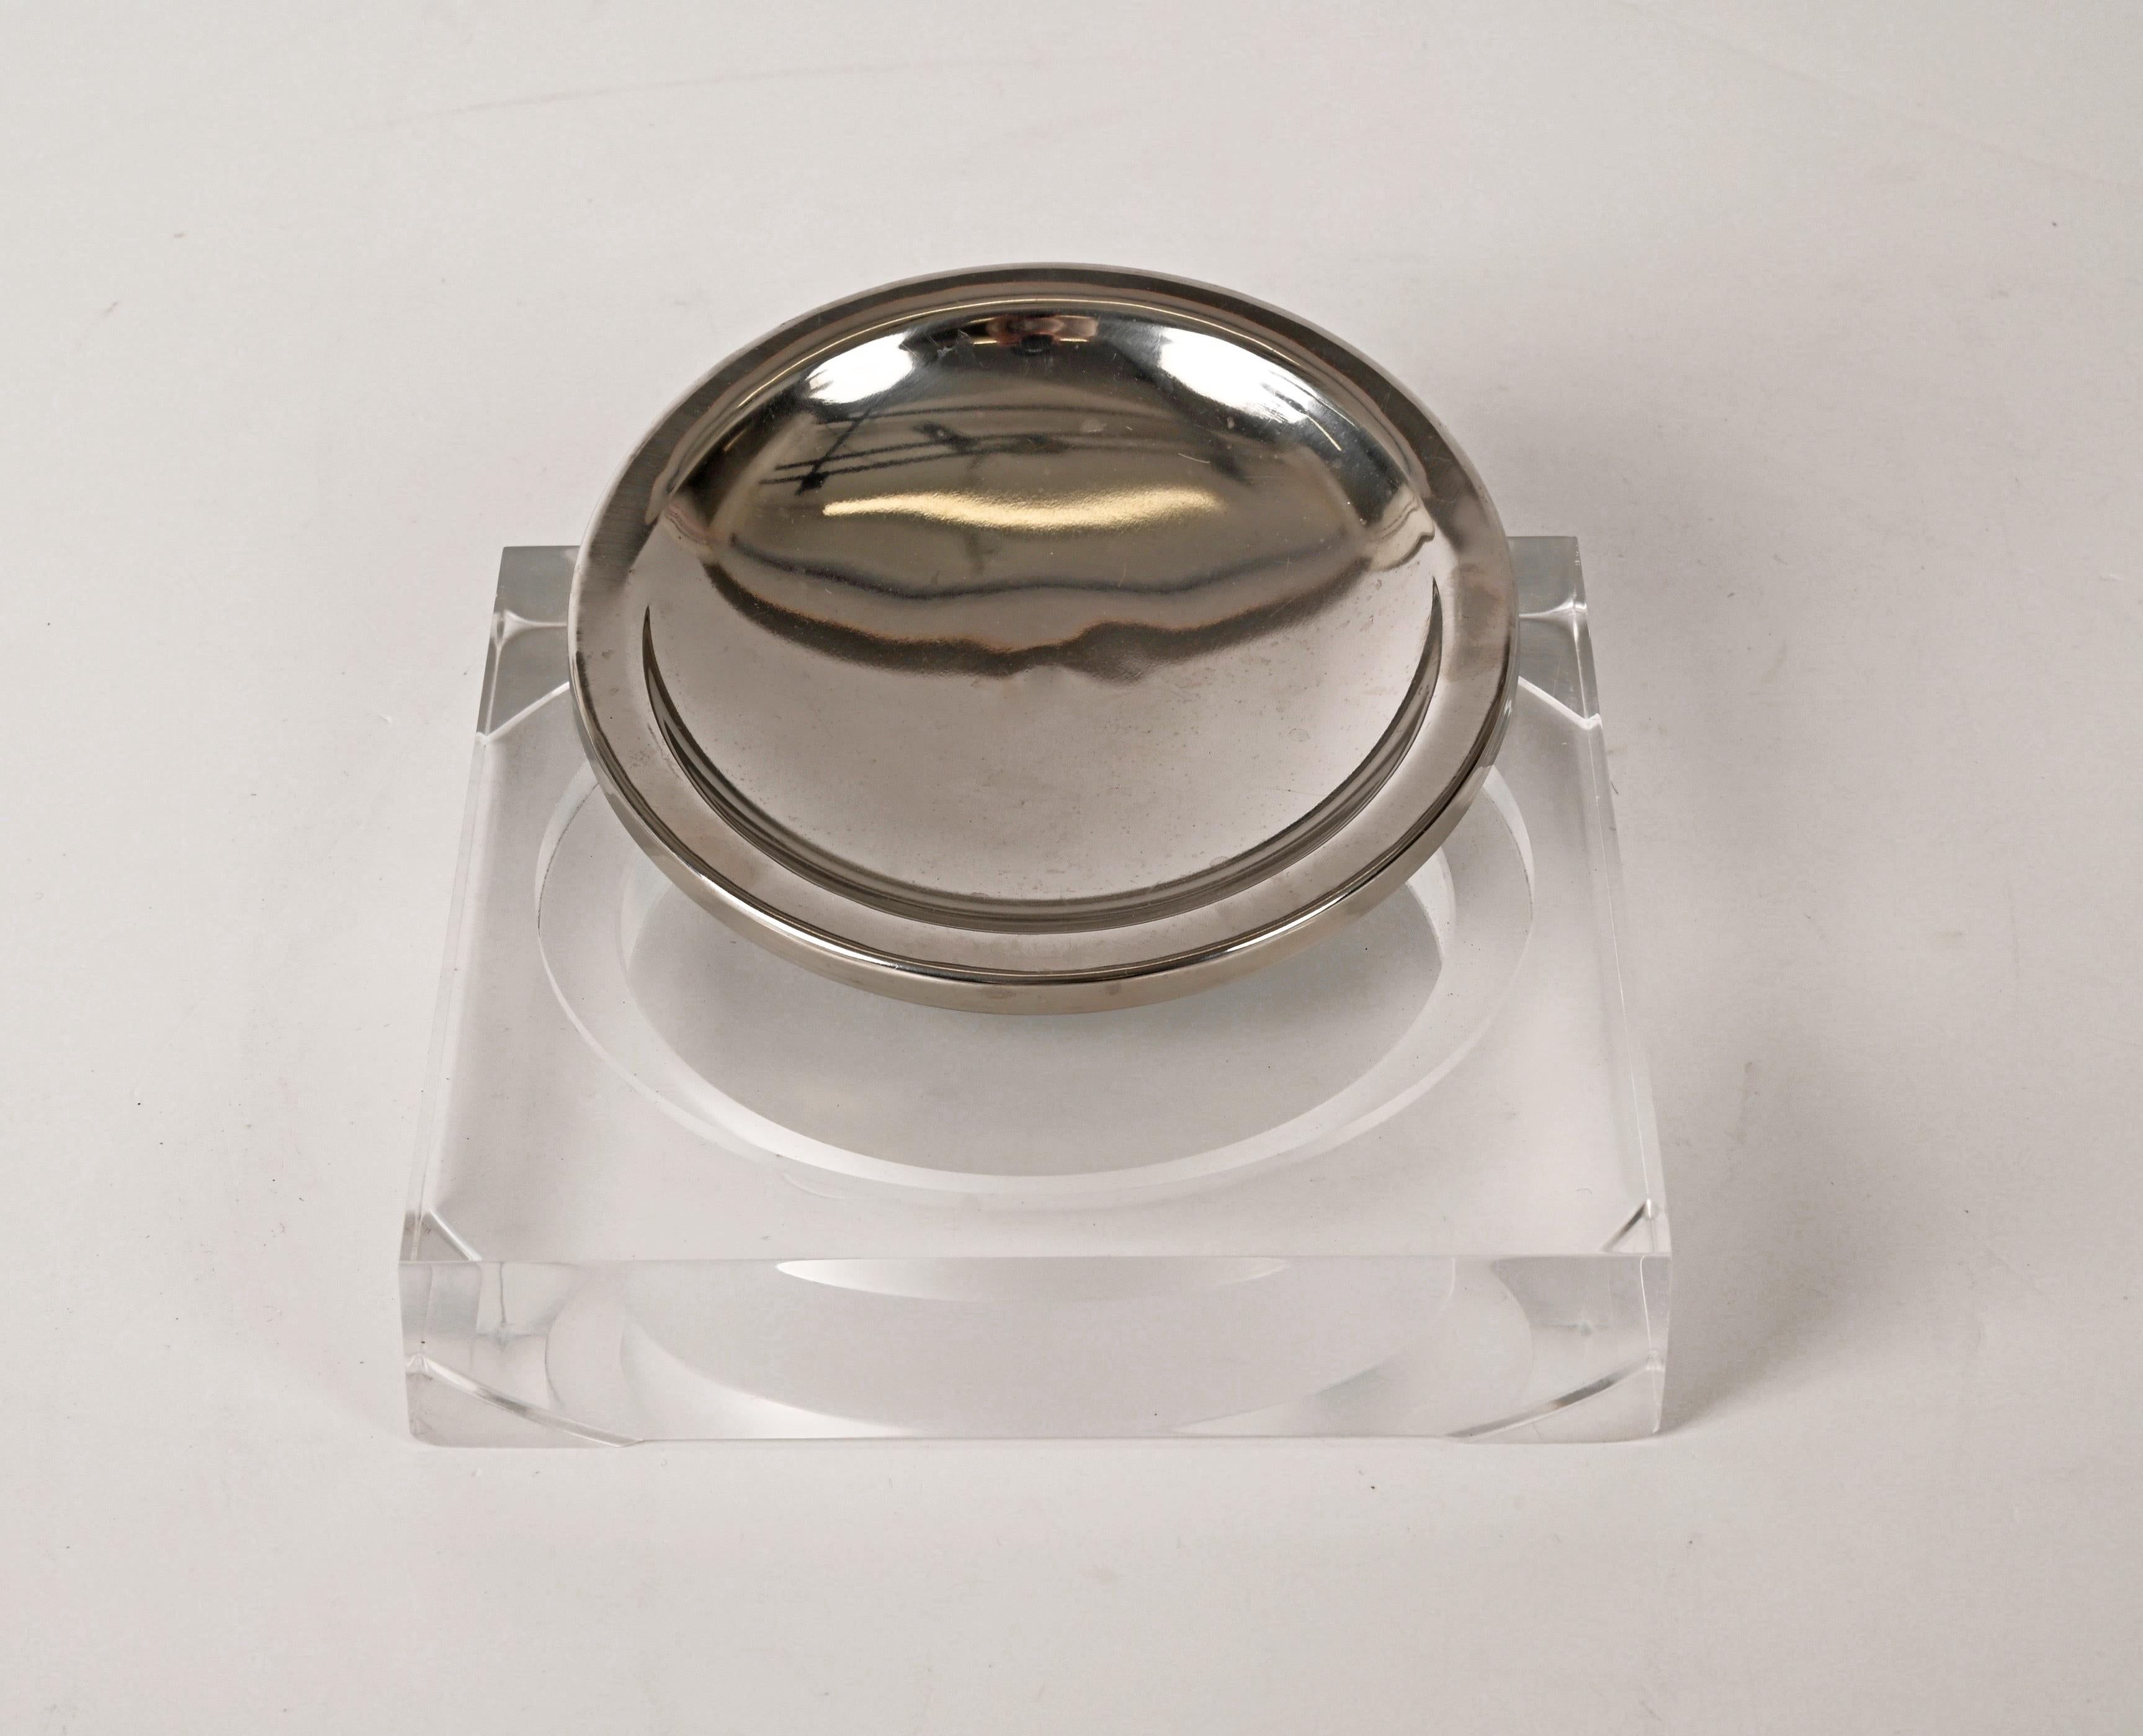 Stunning midcentury Lucite and chrome squared valet tray or ashtray. This wonderful item was produced in France in the style of Christian Dior in 1970.

The pocket emptier is lovely because of the beautiful straight lines and the chromed metal